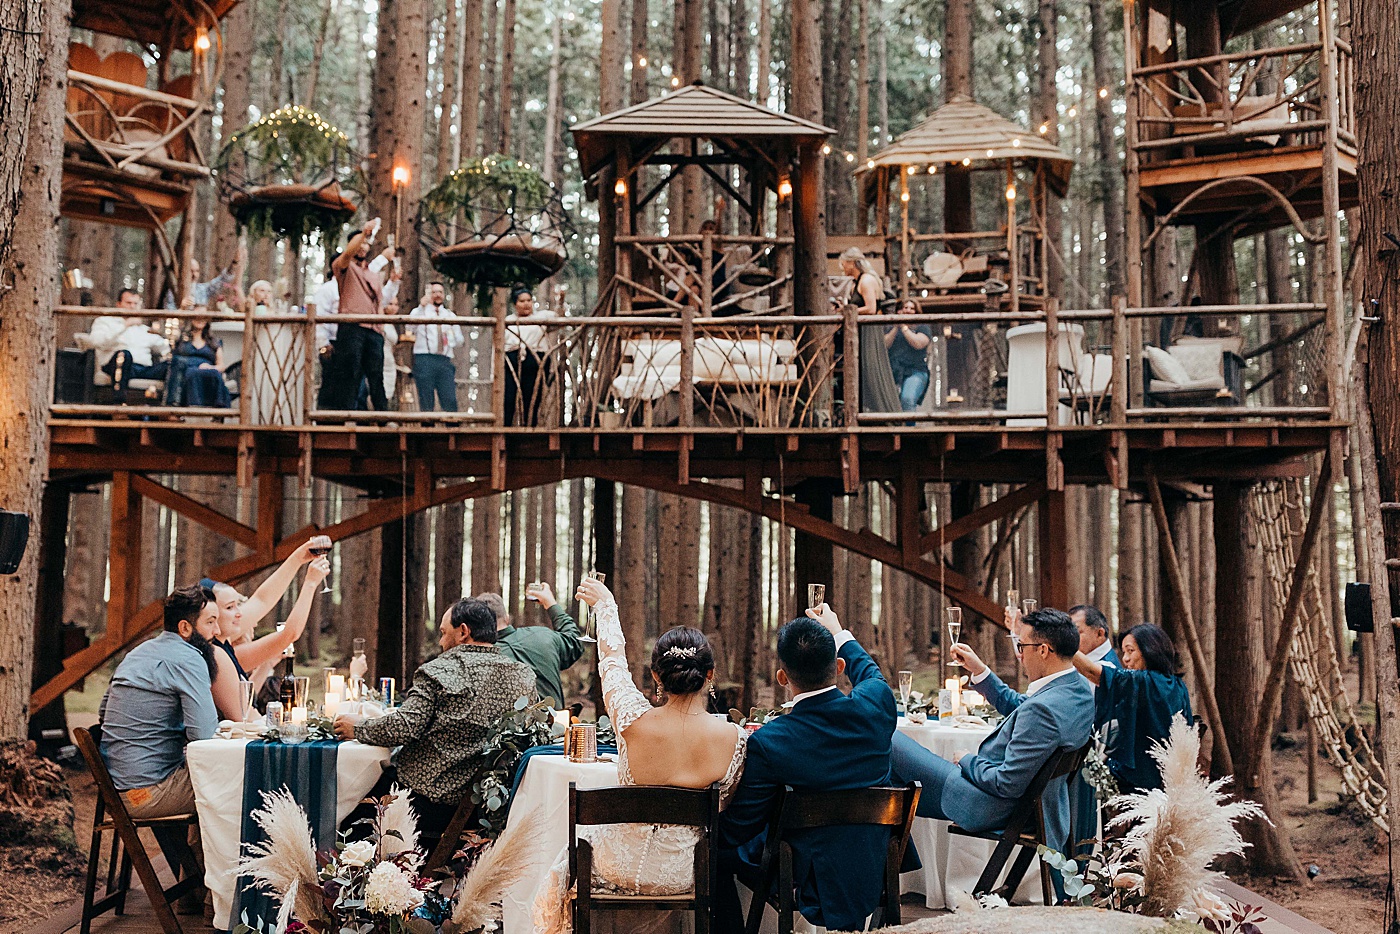 Toasts during reception at Emerald Forest Treehouse | Photo by Megan Montalvo Photography